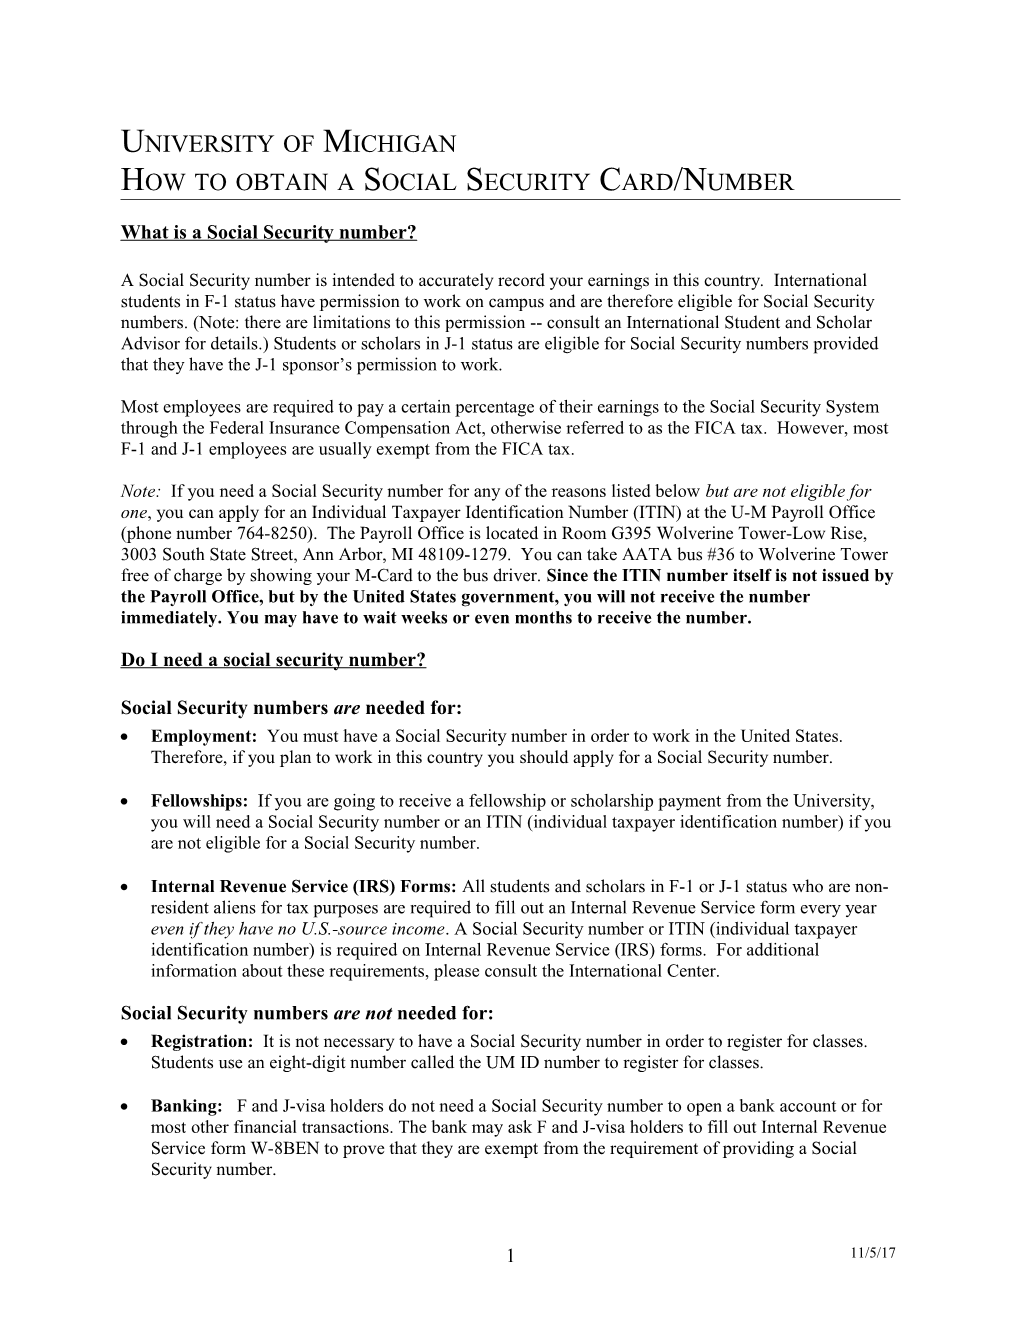 How To Obtain A Social Security Card/Number